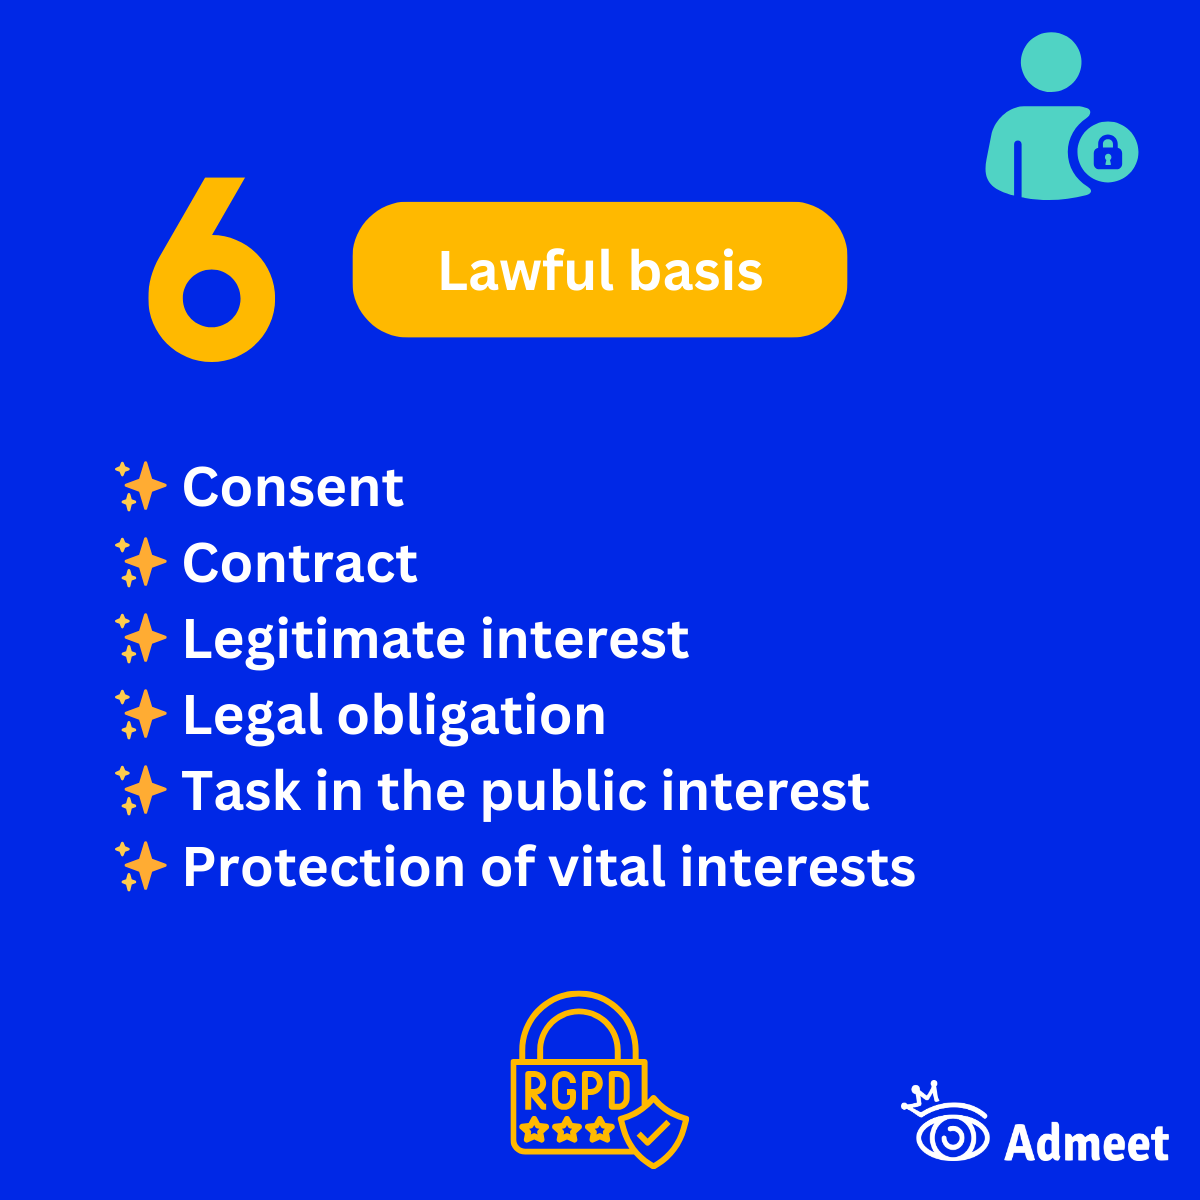 Lawful basis GDPR: Everything you need to know about the principle of lawful processing